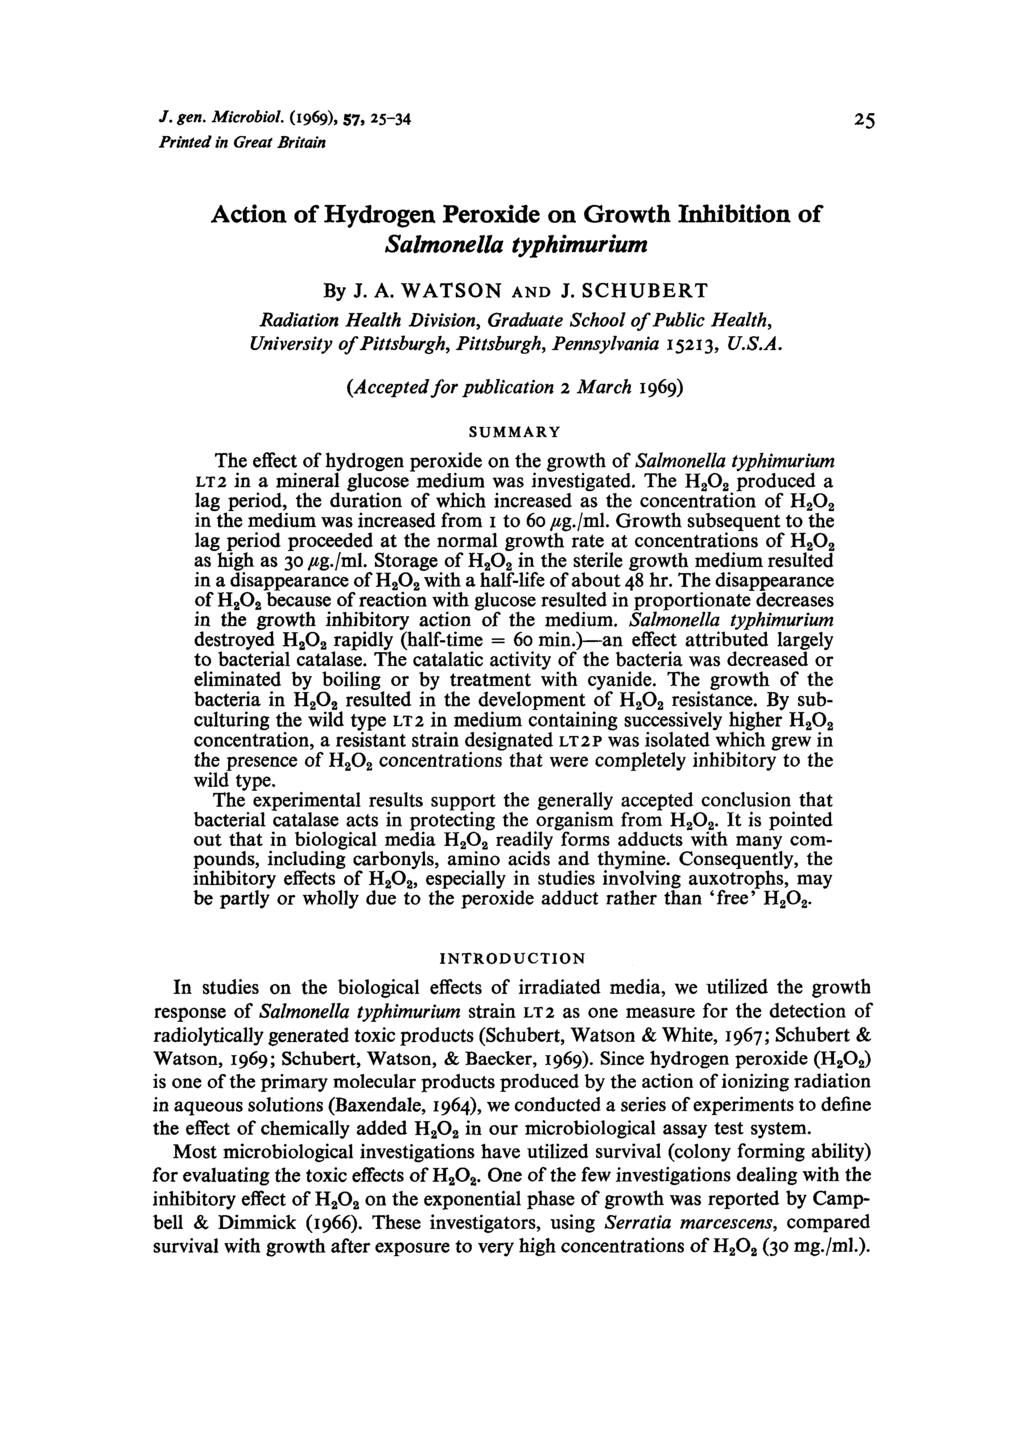 J. gen. Microbiol. (IS+), 57, 25-34 Printed in Great Britain Action of Hydrogen Peroxide on Growth Inhibition of Salmonella typh imur ium By J. A. WATSON AND J.